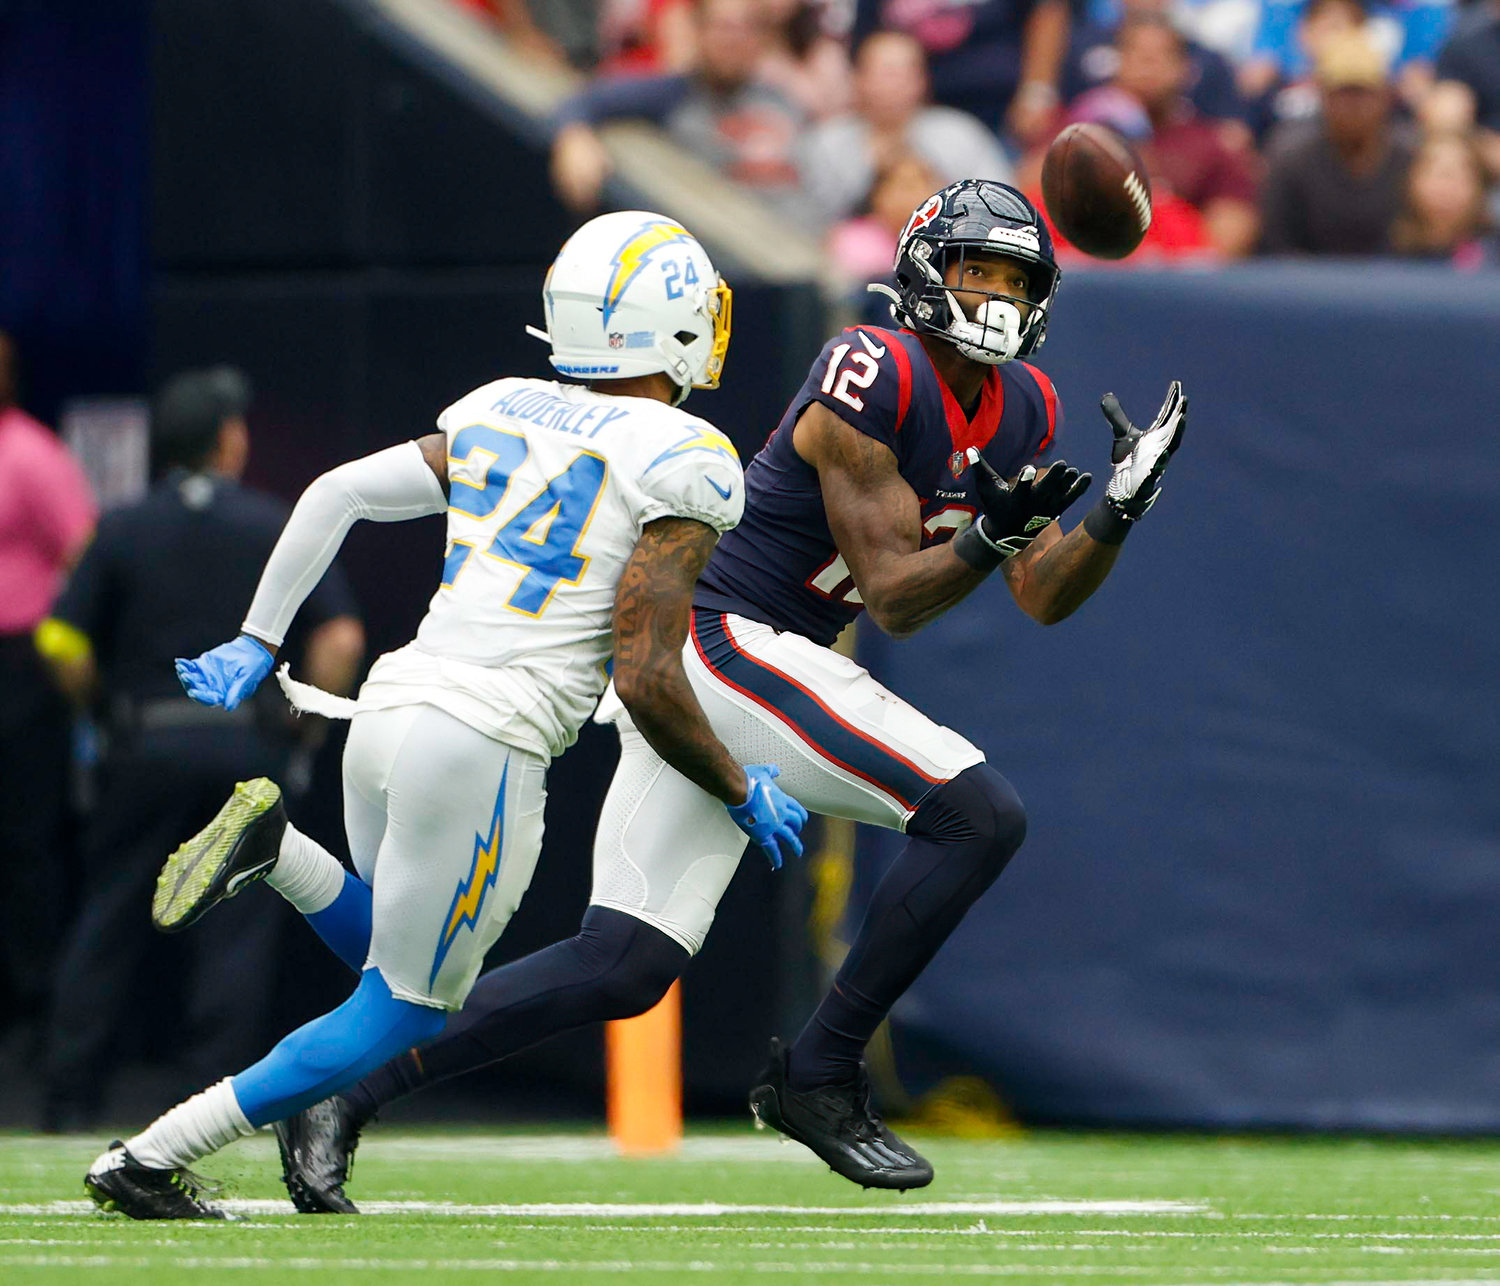 Texans wide receiver Nico Collins (12) brings in a 58-yard pass down to the 18 yard line to set up a Houston touchdown in the 4th quarter of an NFL game between the Texans and the Chargers on Oct. 2, 2022 in Houston. The Chargers won 34-24.